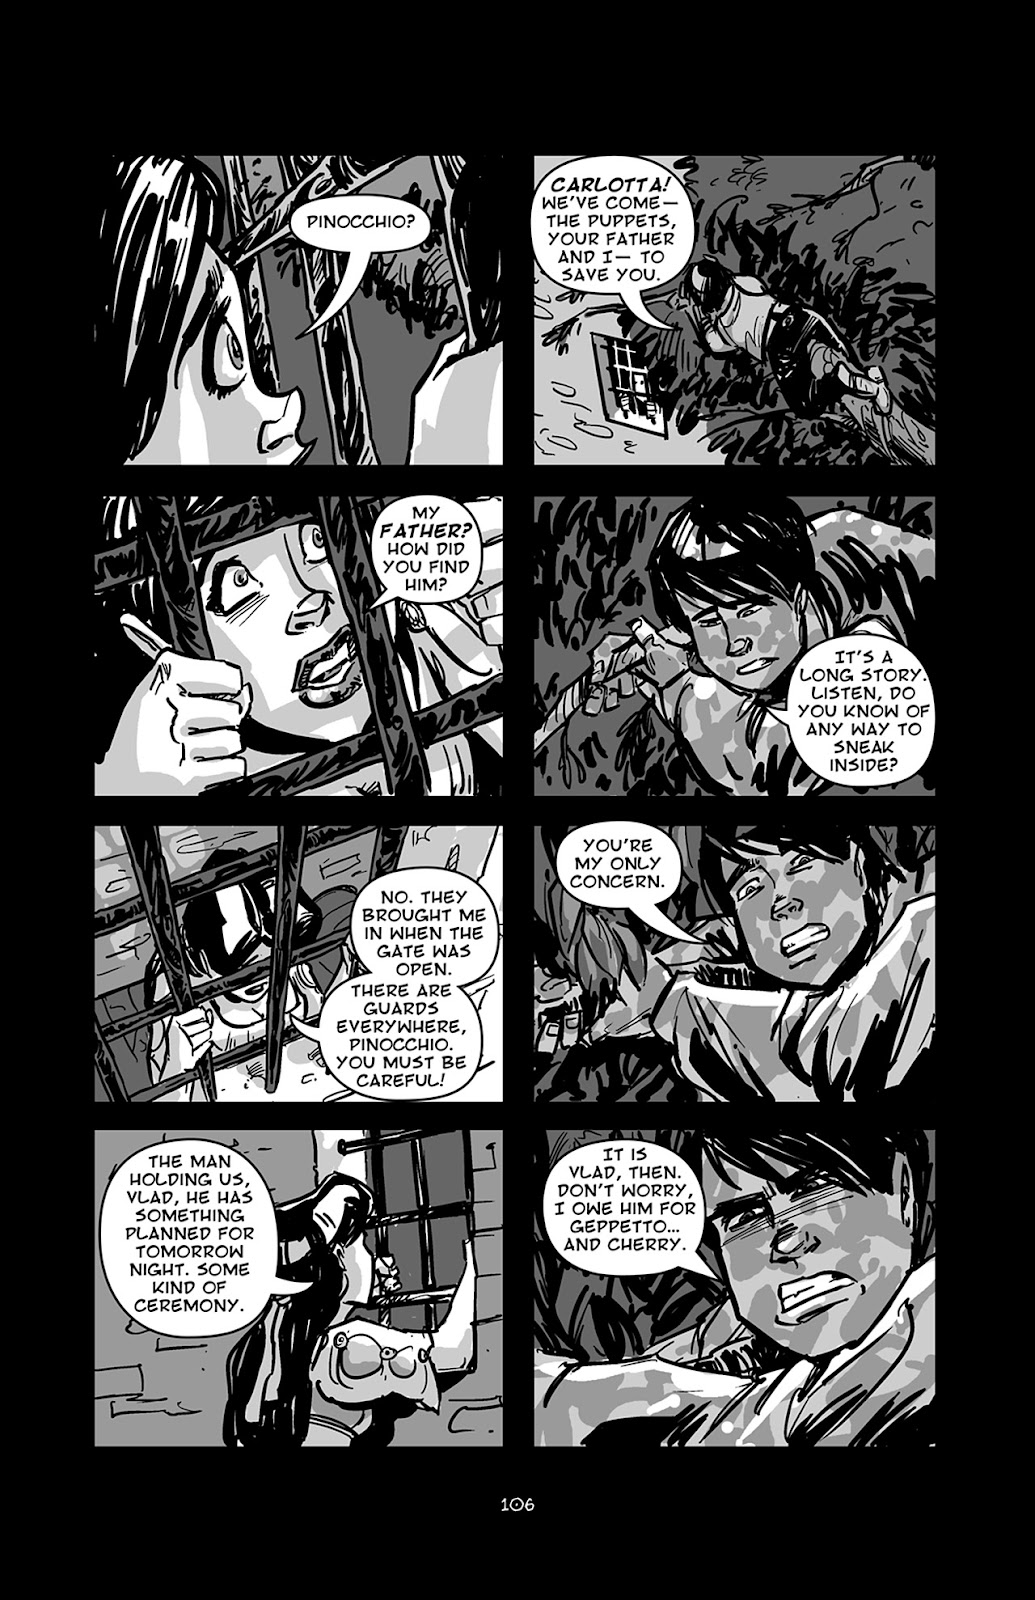 Pinocchio: Vampire Slayer - Of Wood and Blood issue 5 - Page 7